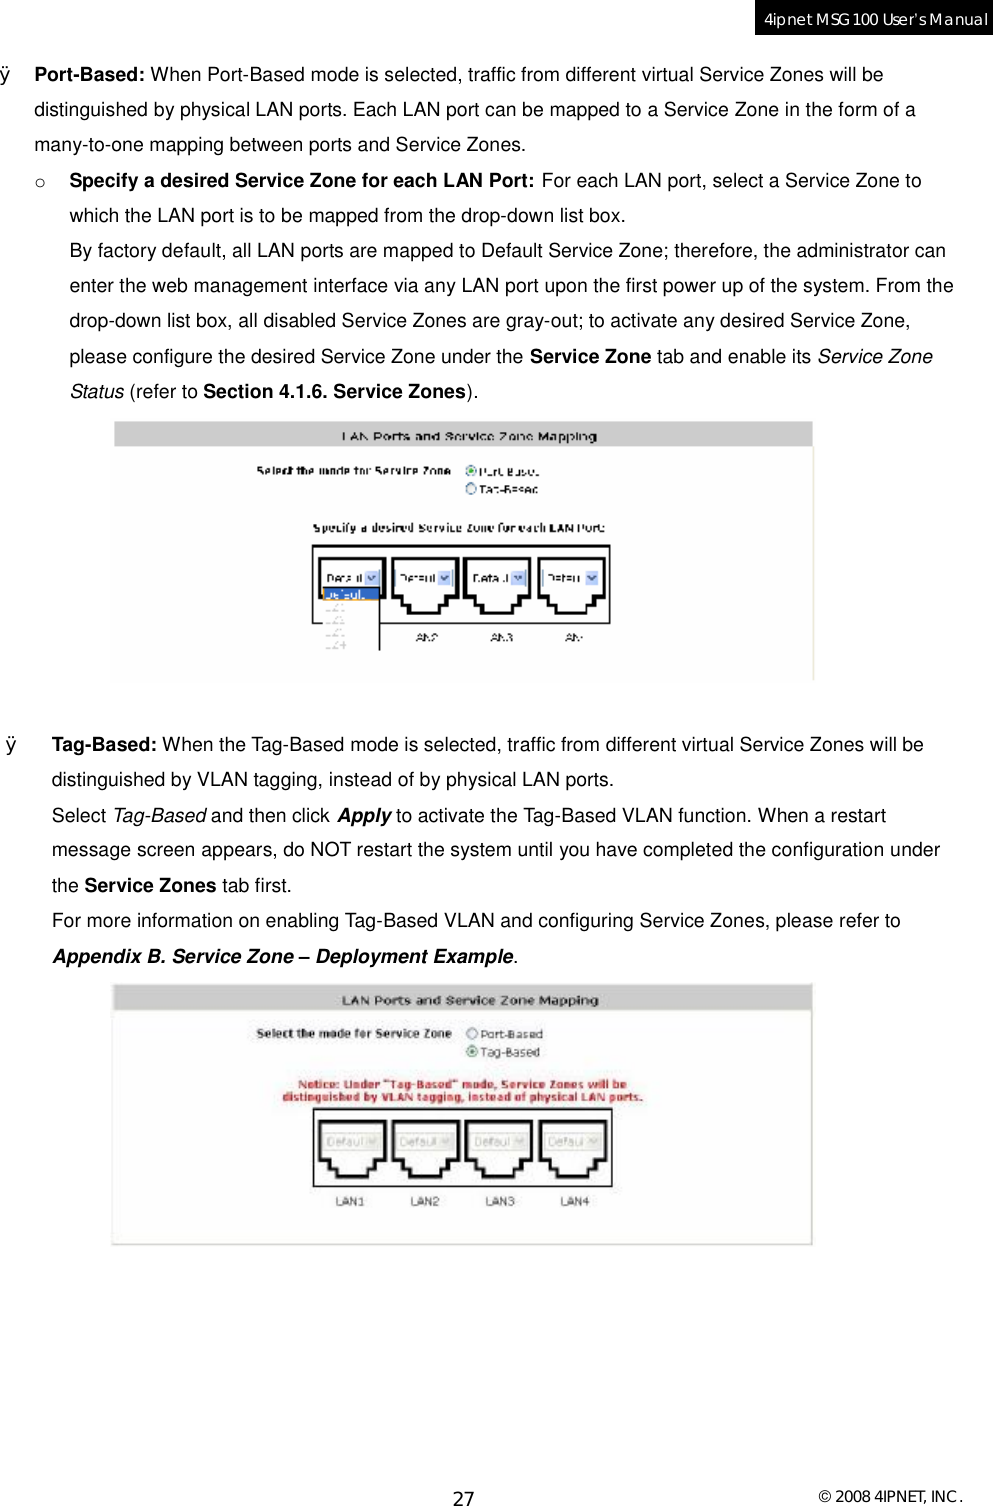  © 2008 4IPNET, INC. 27 4ipnet MSG100 User’s Manual  Ø Port-Based: When Port-Based mode is selected, traffic from different virtual Service Zones will be distinguished by physical LAN ports. Each LAN port can be mapped to a Service Zone in the form of a many-to-one mapping between ports and Service Zones.  o Specify a desired Service Zone for each LAN Port: For each LAN port, select a Service Zone to which the LAN port is to be mapped from the drop-down list box.  By factory default, all LAN ports are mapped to Default Service Zone; therefore, the administrator can enter the web management interface via any LAN port upon the first power up of the system. From the drop-down list box, all disabled Service Zones are gray-out; to activate any desired Service Zone, please configure the desired Service Zone under the Service Zone tab and enable its Service Zone Status (refer to Section 4.1.6. Service Zones).   Ø Tag-Based: When the Tag-Based mode is selected, traffic from different virtual Service Zones will be distinguished by VLAN tagging, instead of by physical LAN ports. Select Tag-Based and then click Apply to activate the Tag-Based VLAN function. When a restart message screen appears, do NOT restart the system until you have completed the configuration under the Service Zones tab first.  For more information on enabling Tag-Based VLAN and configuring Service Zones, please refer to Appendix B. Service Zone – Deployment Example.    